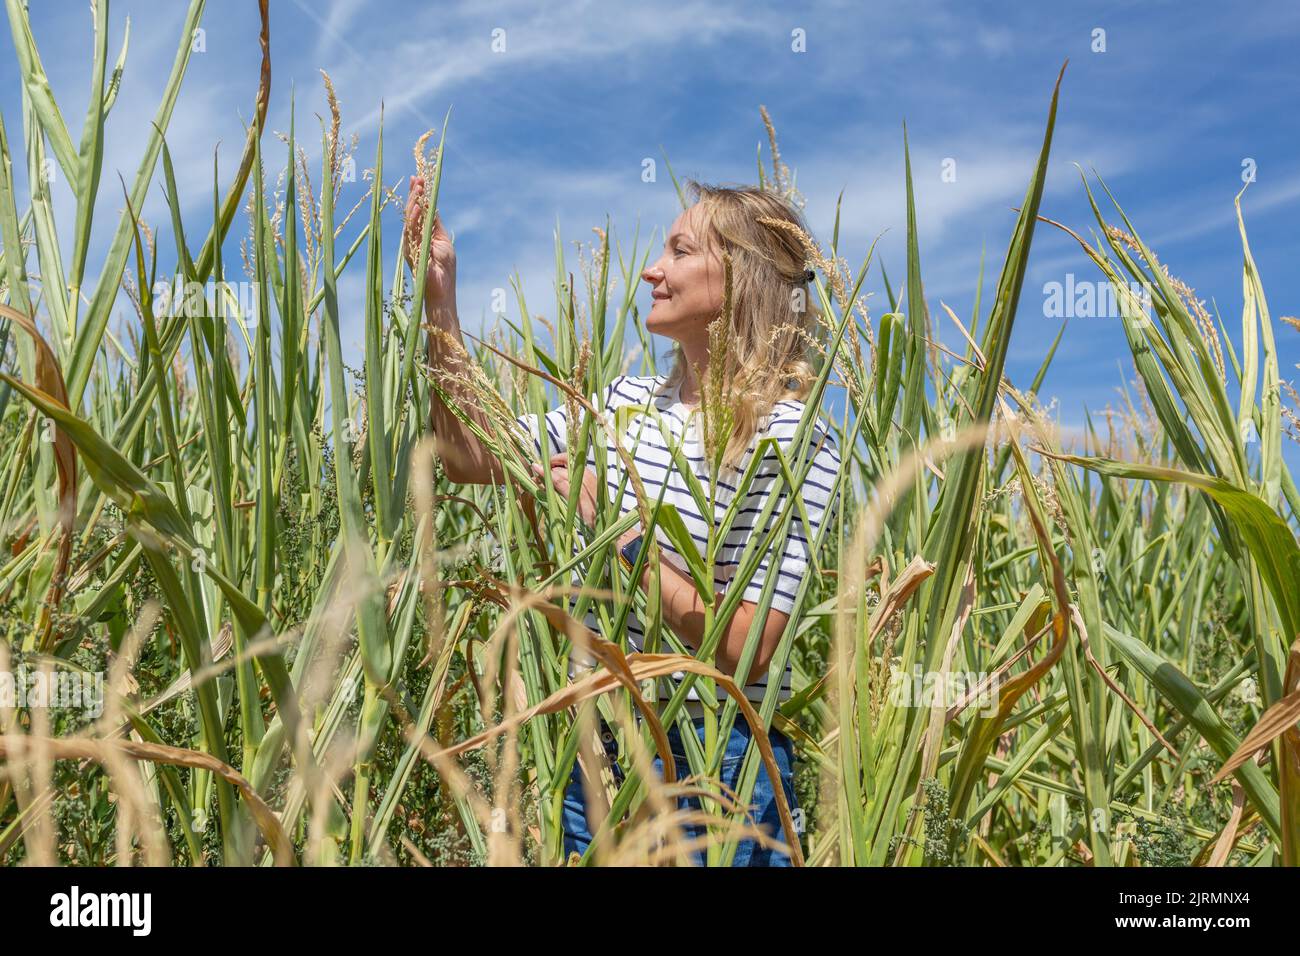 A woman in a corn field checks plants against a blue sky Stock Photo